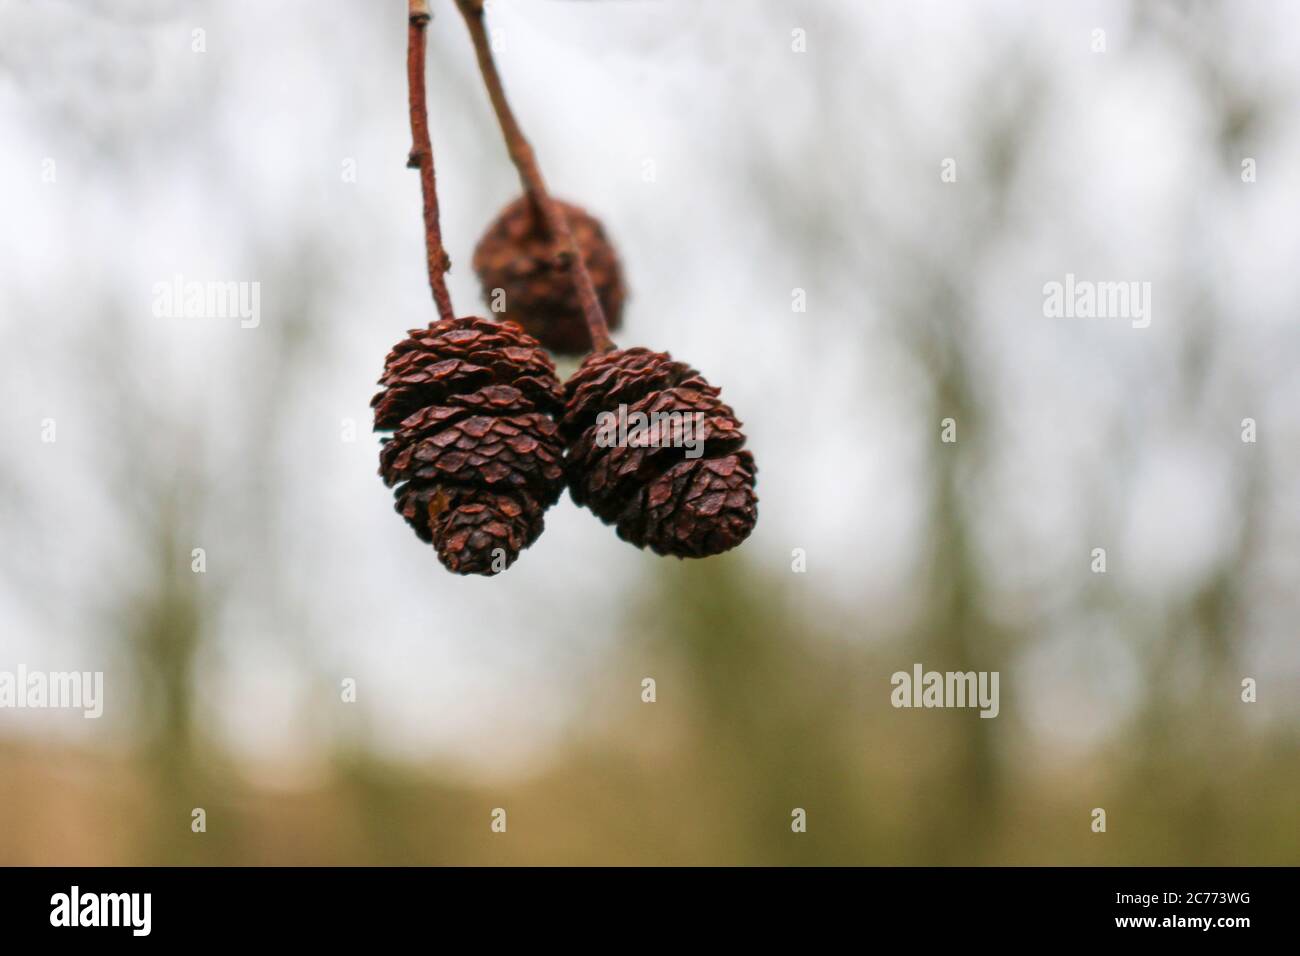 Two alder tree, Alnus glutinosa, cones at the end of a small stalk with a blurred background of trees. Stock Photo